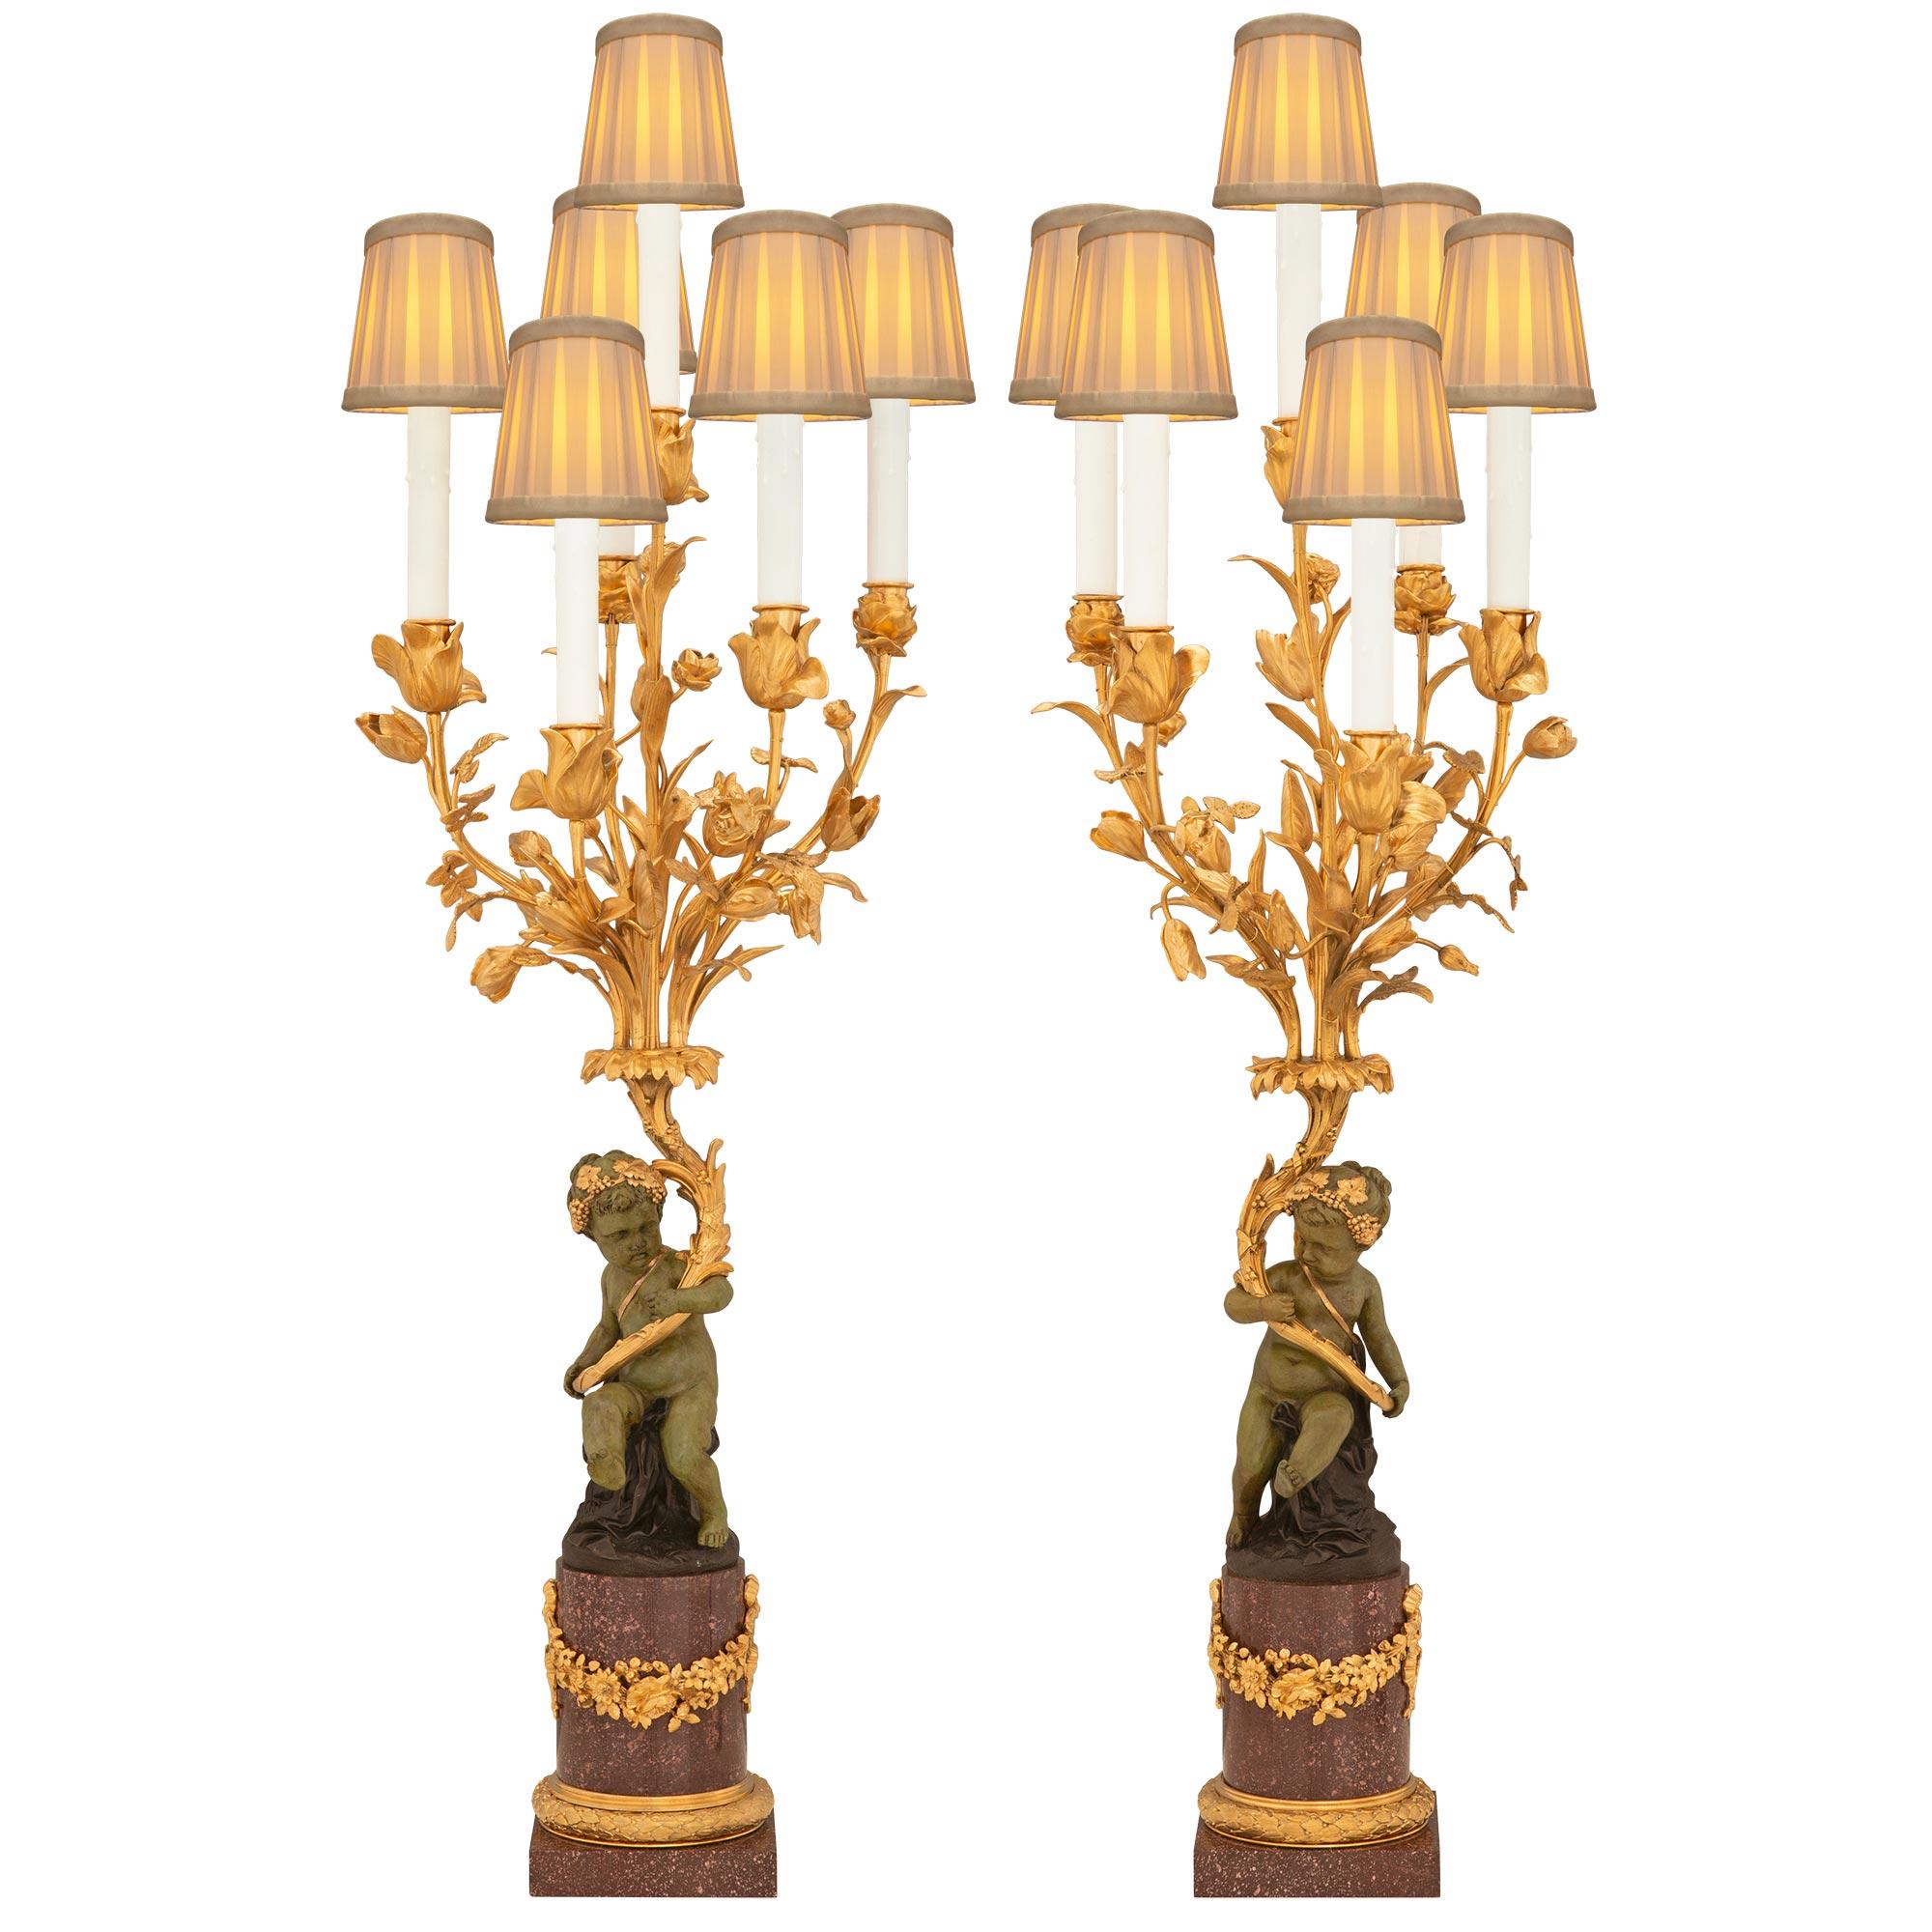 True Pair of French 19th Century Belle Époque Period Bronze & Porphyry Lamps For Sale 8